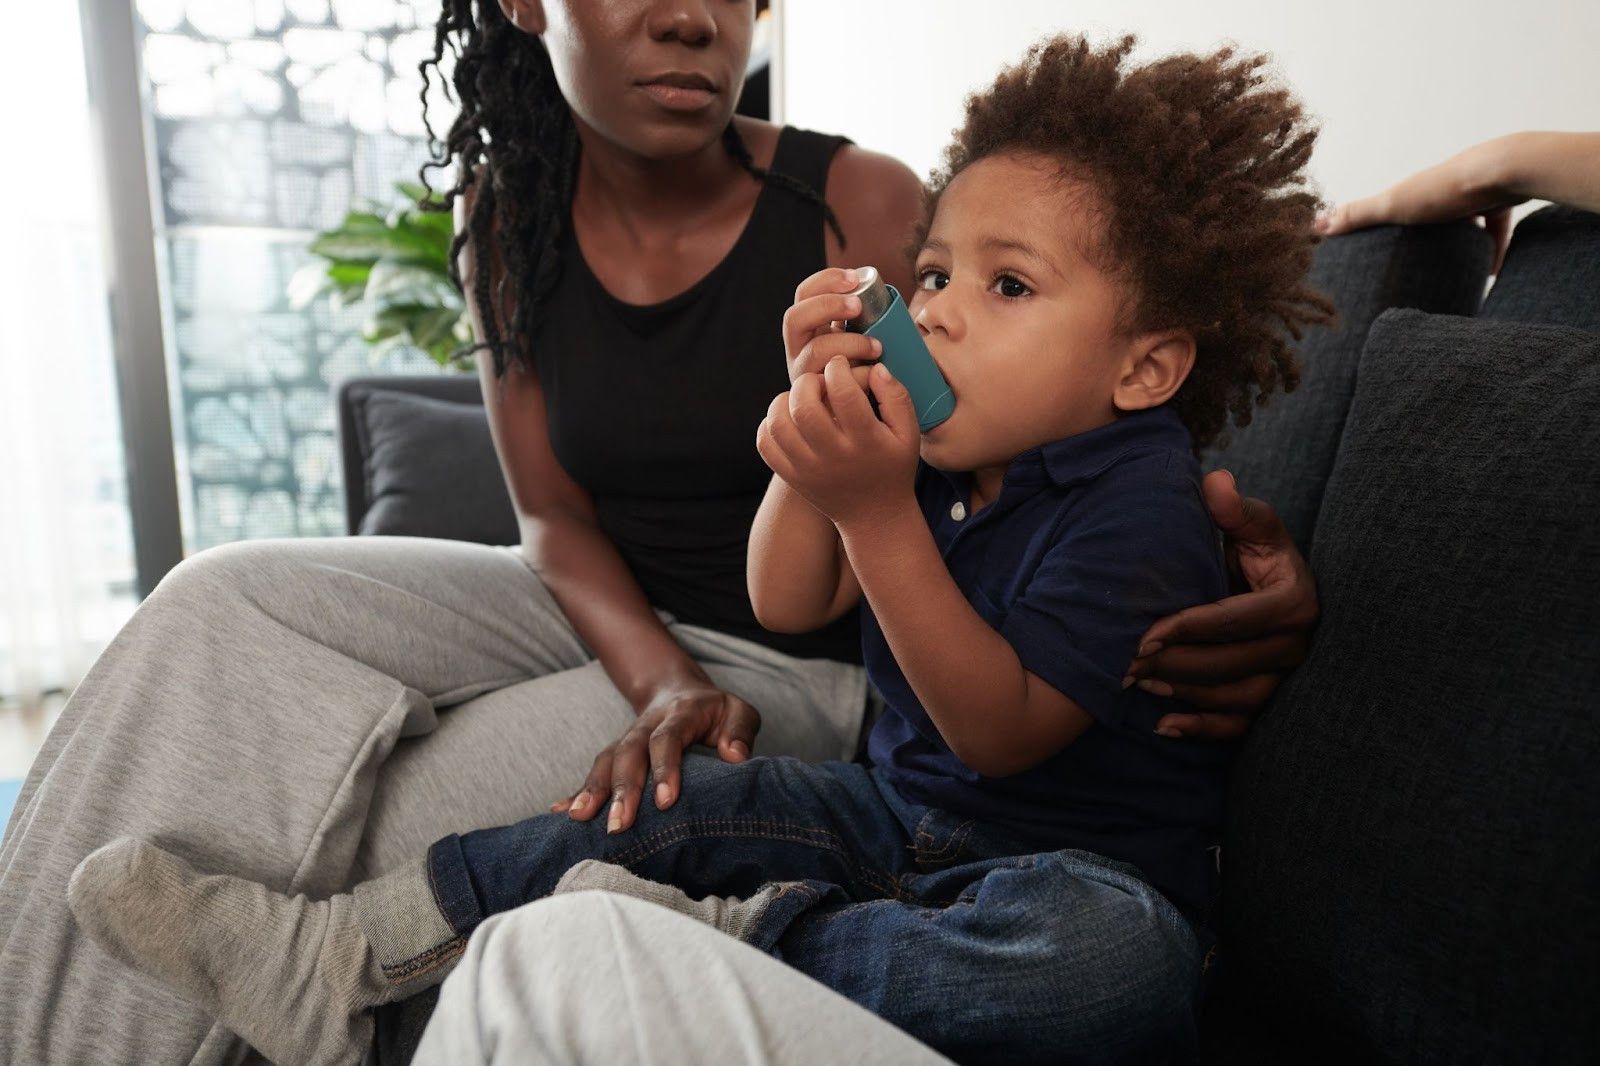 A woman is sitting on a couch with a child who is using an inhaler.